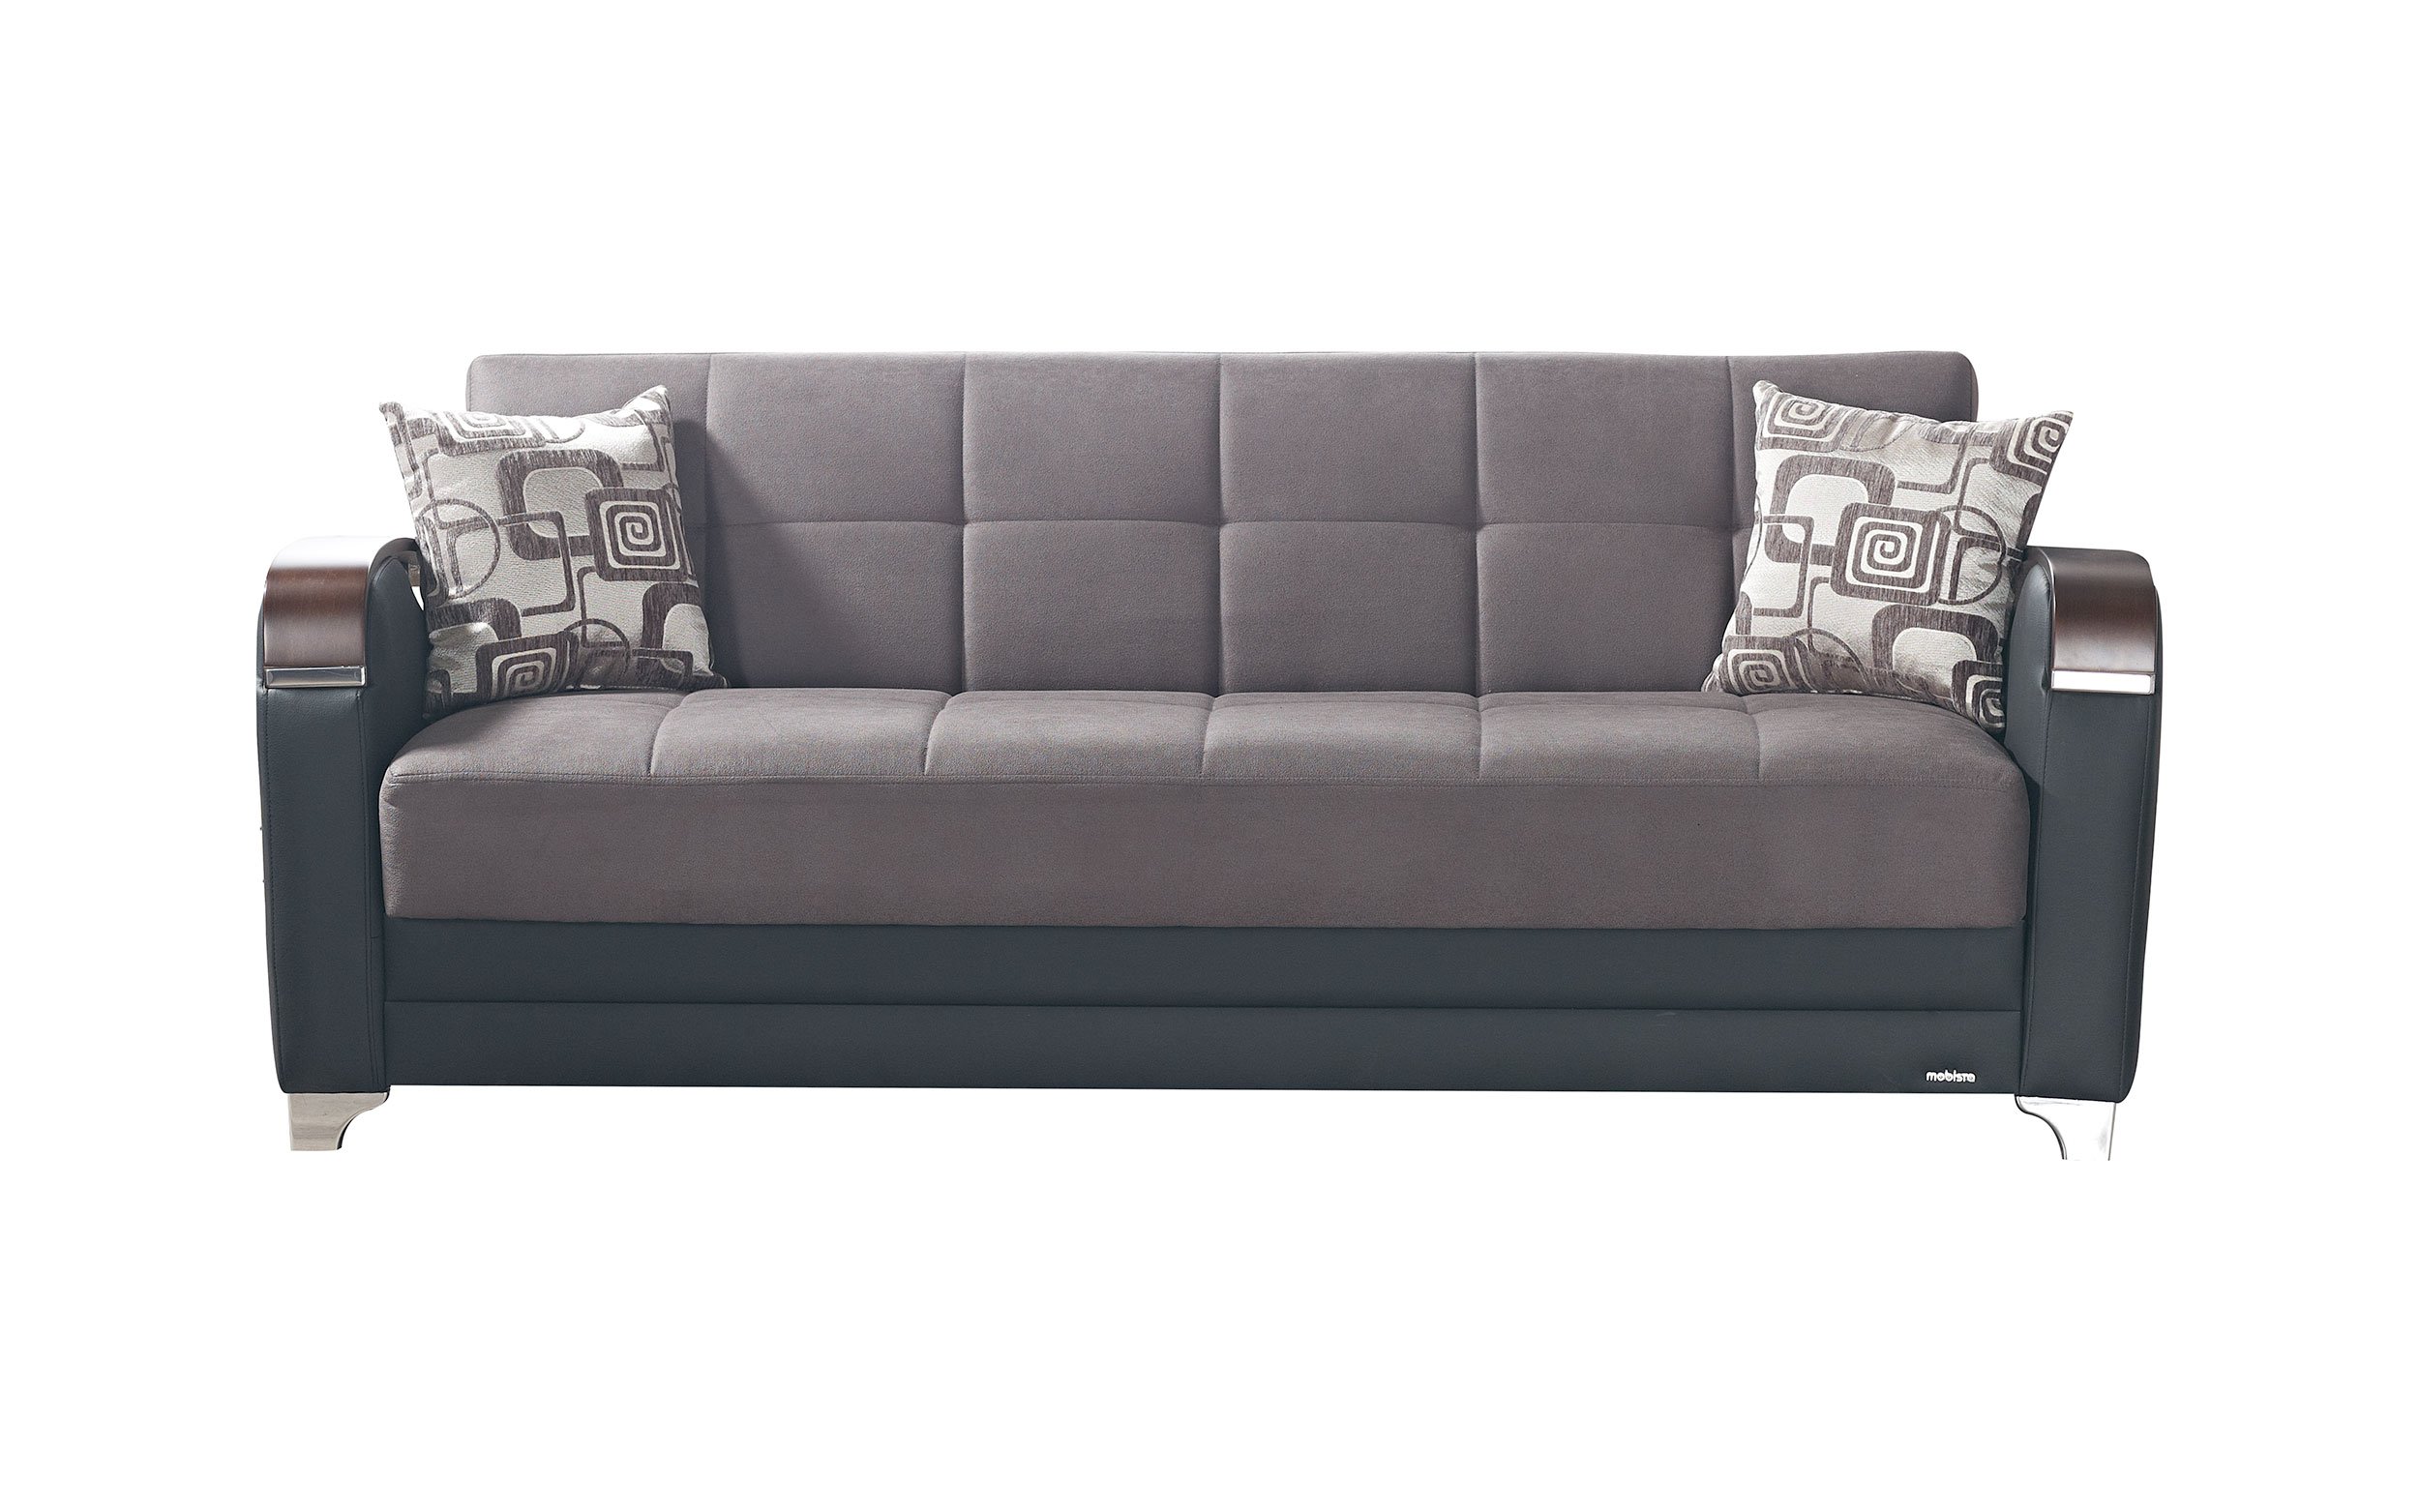 Etro Vintage Gray Fabric Sofa Bed by Mobista